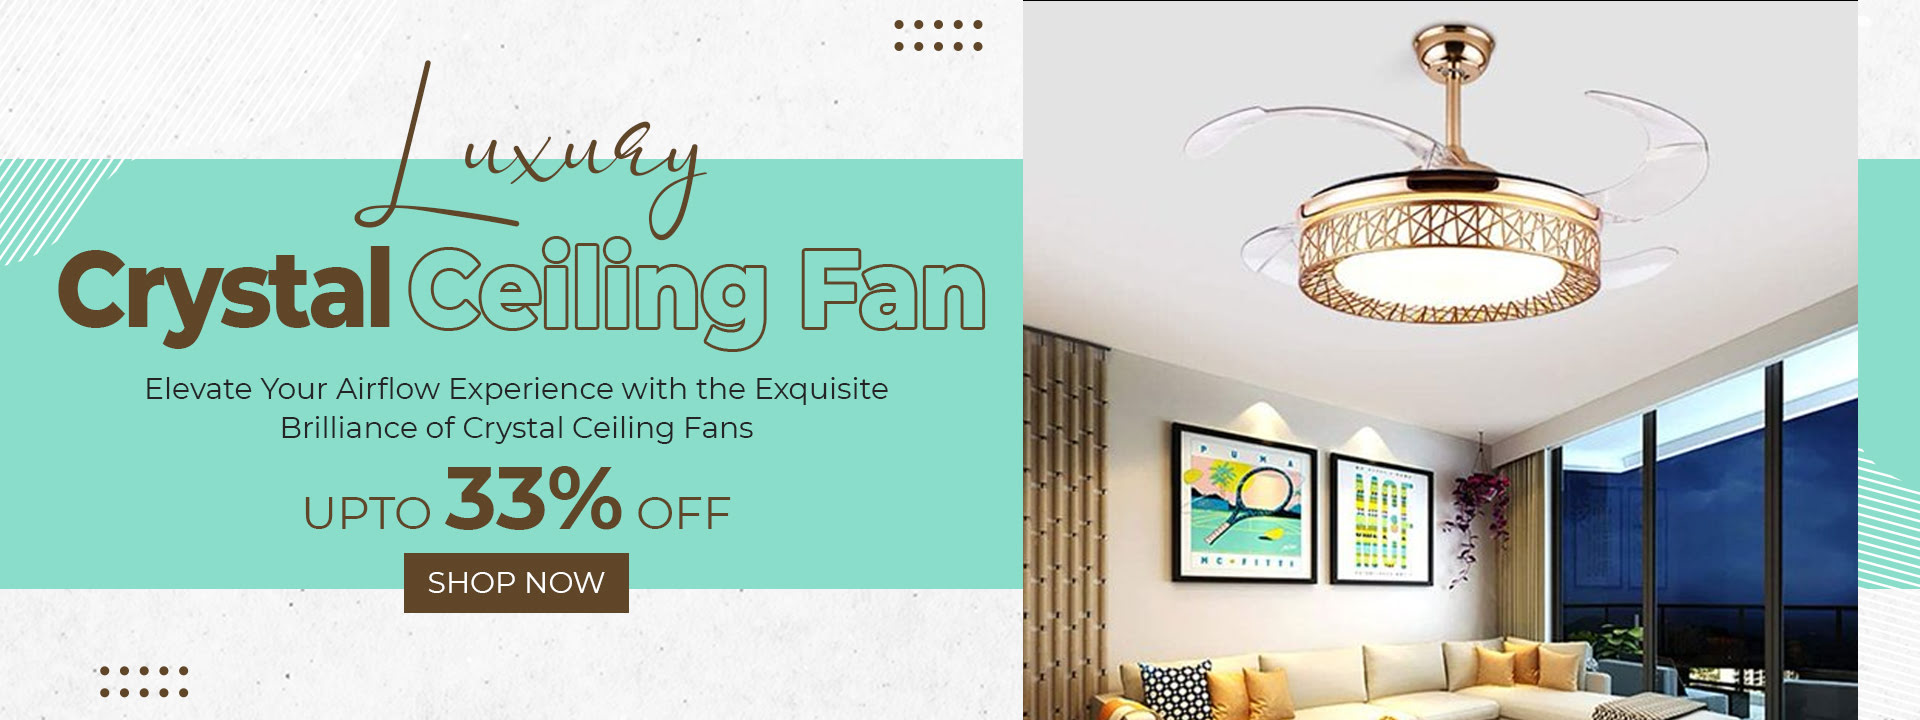 Wall Clock Collections buy now upto 55% discount